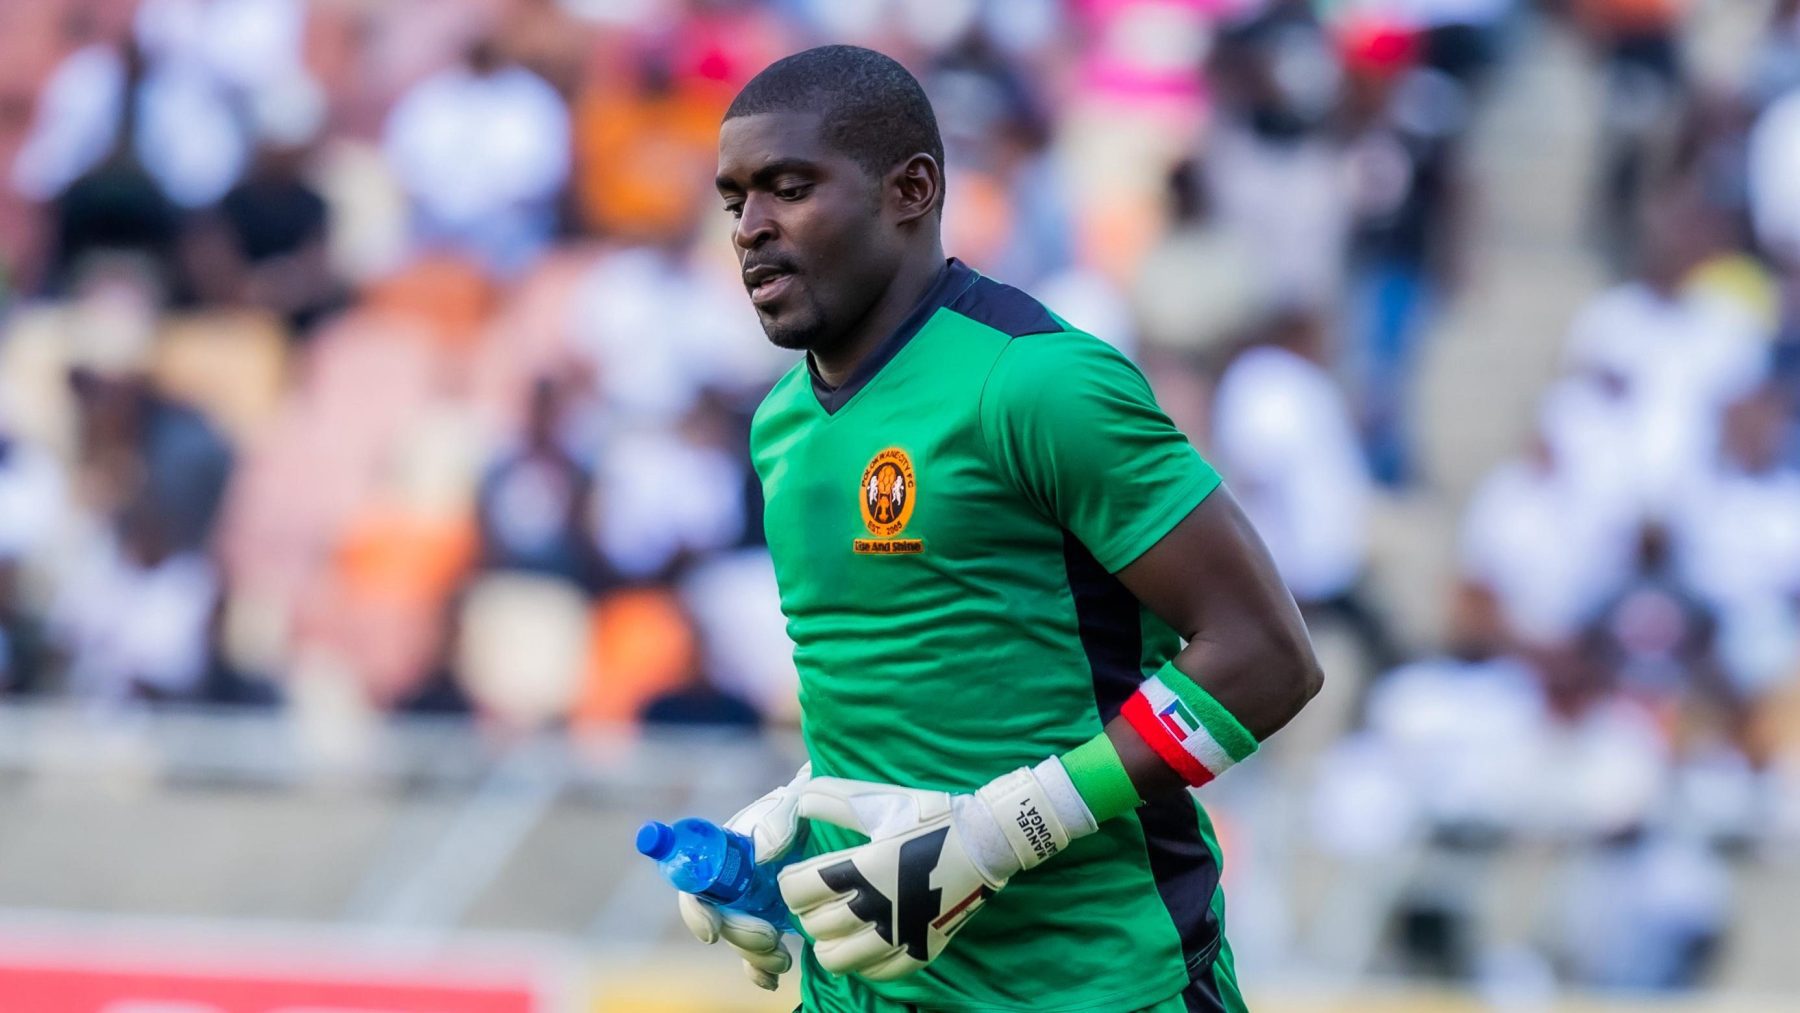 Manuel Sapunga has been one of the best Polokwane City players